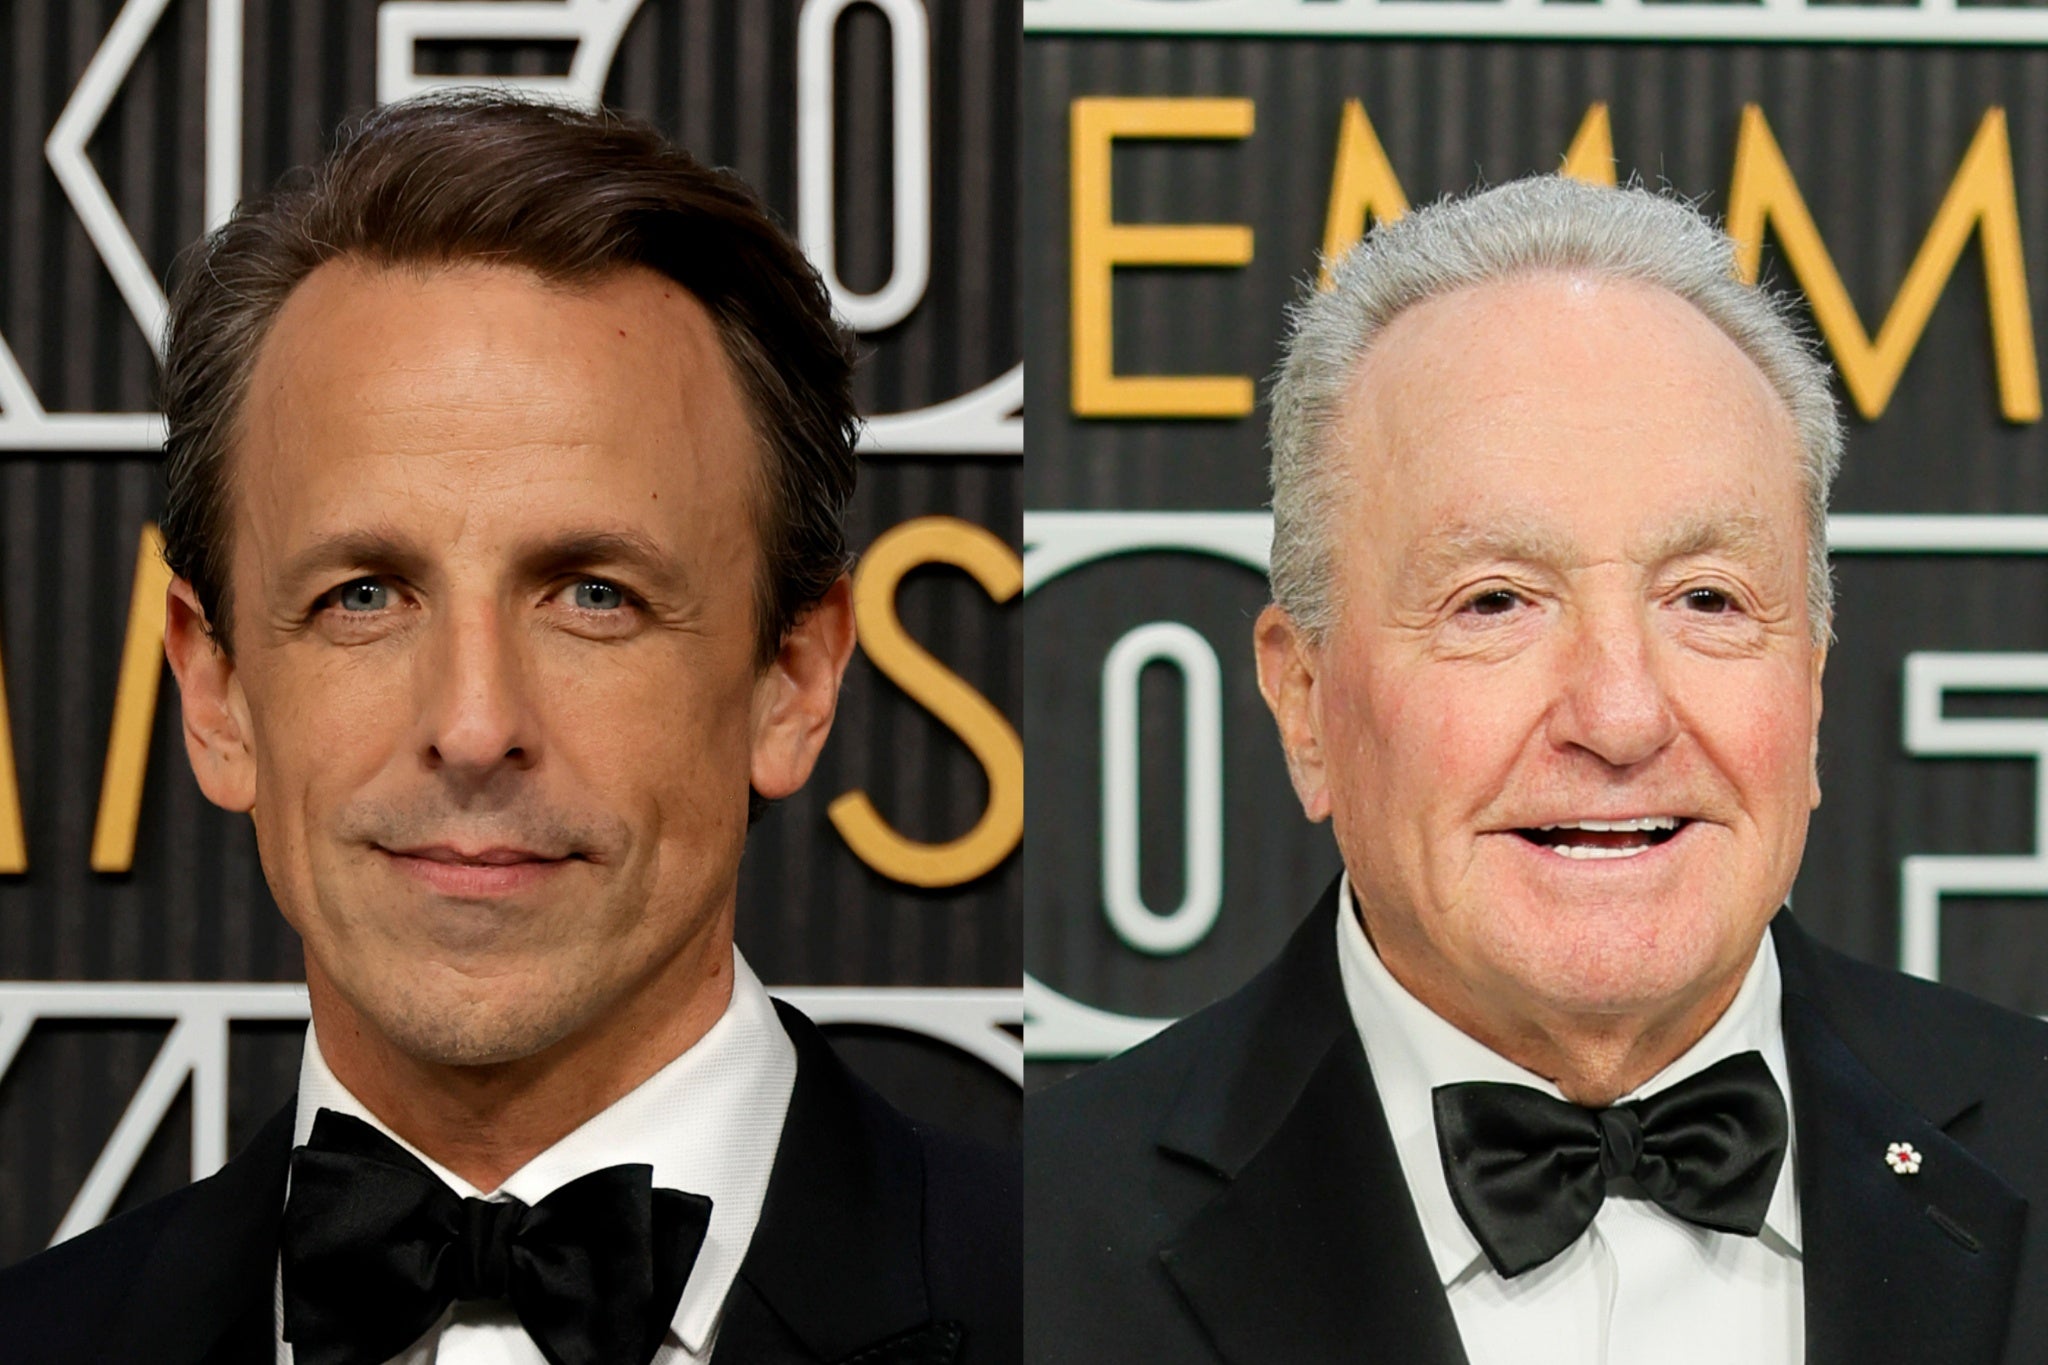 Seth Meyers and Lorne Michaels